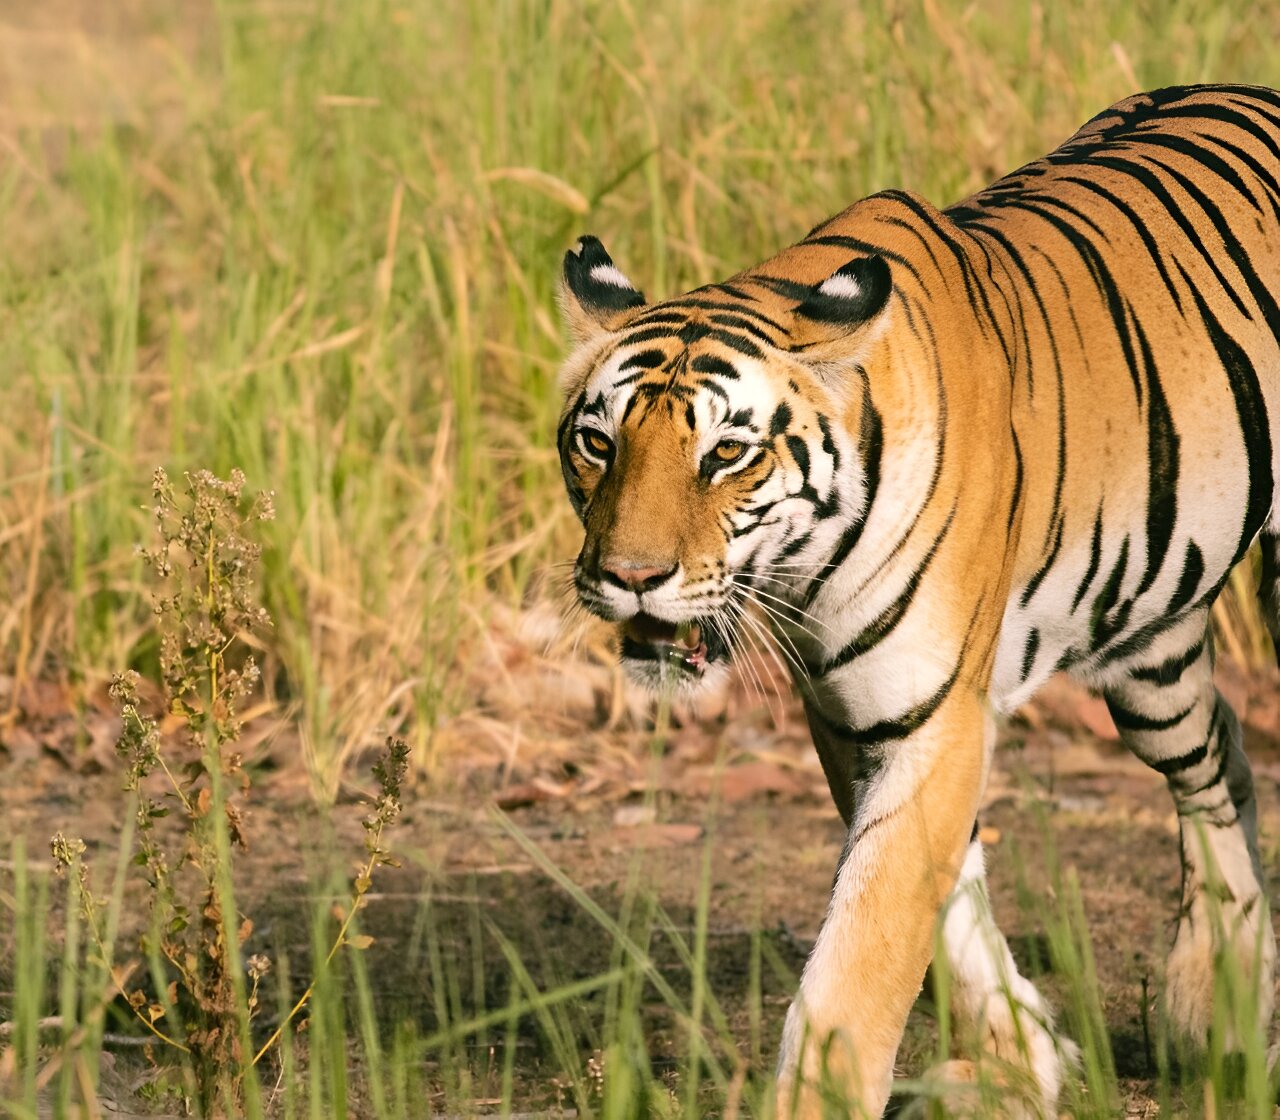 New Video: Saving the Last Tigers of Asia, News